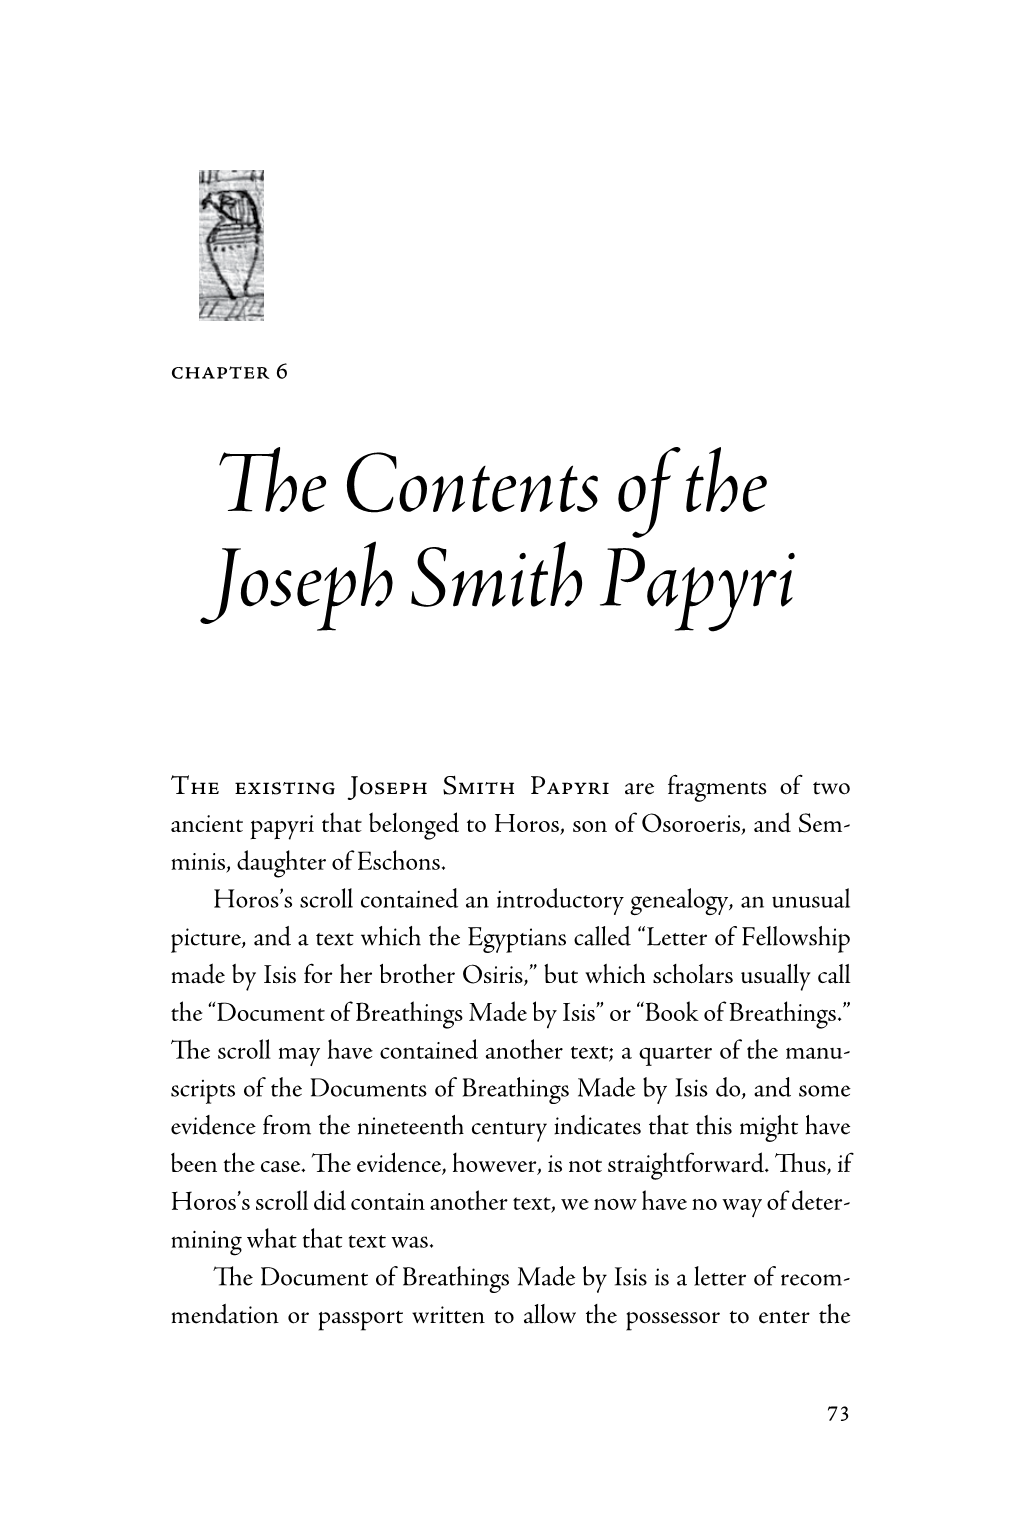 The Contents of the Joseph Smith Papyri